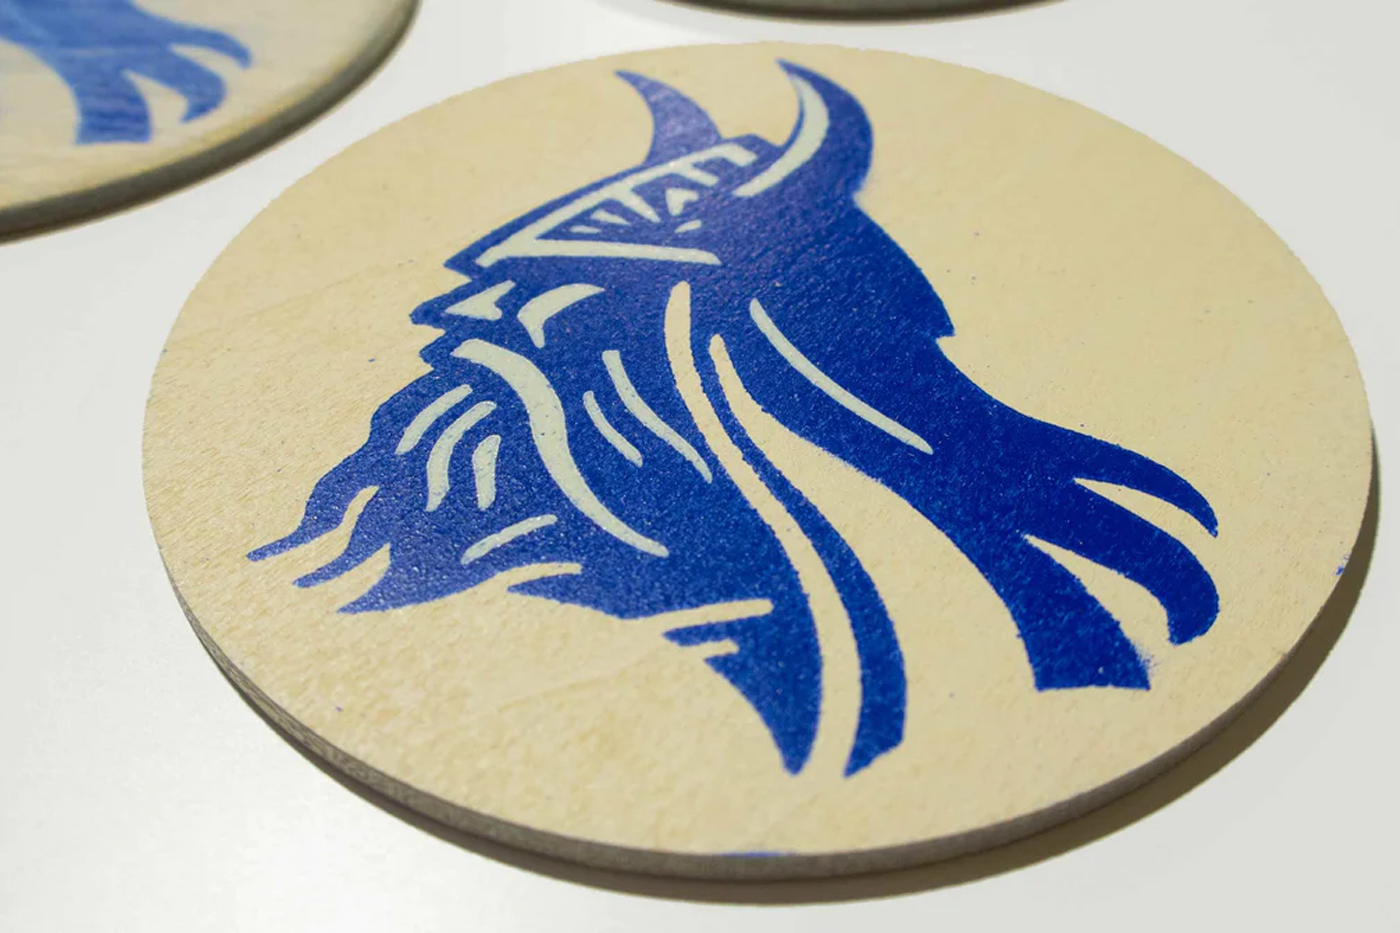 How to Make Wooden Beer Coasters Using a Stencil